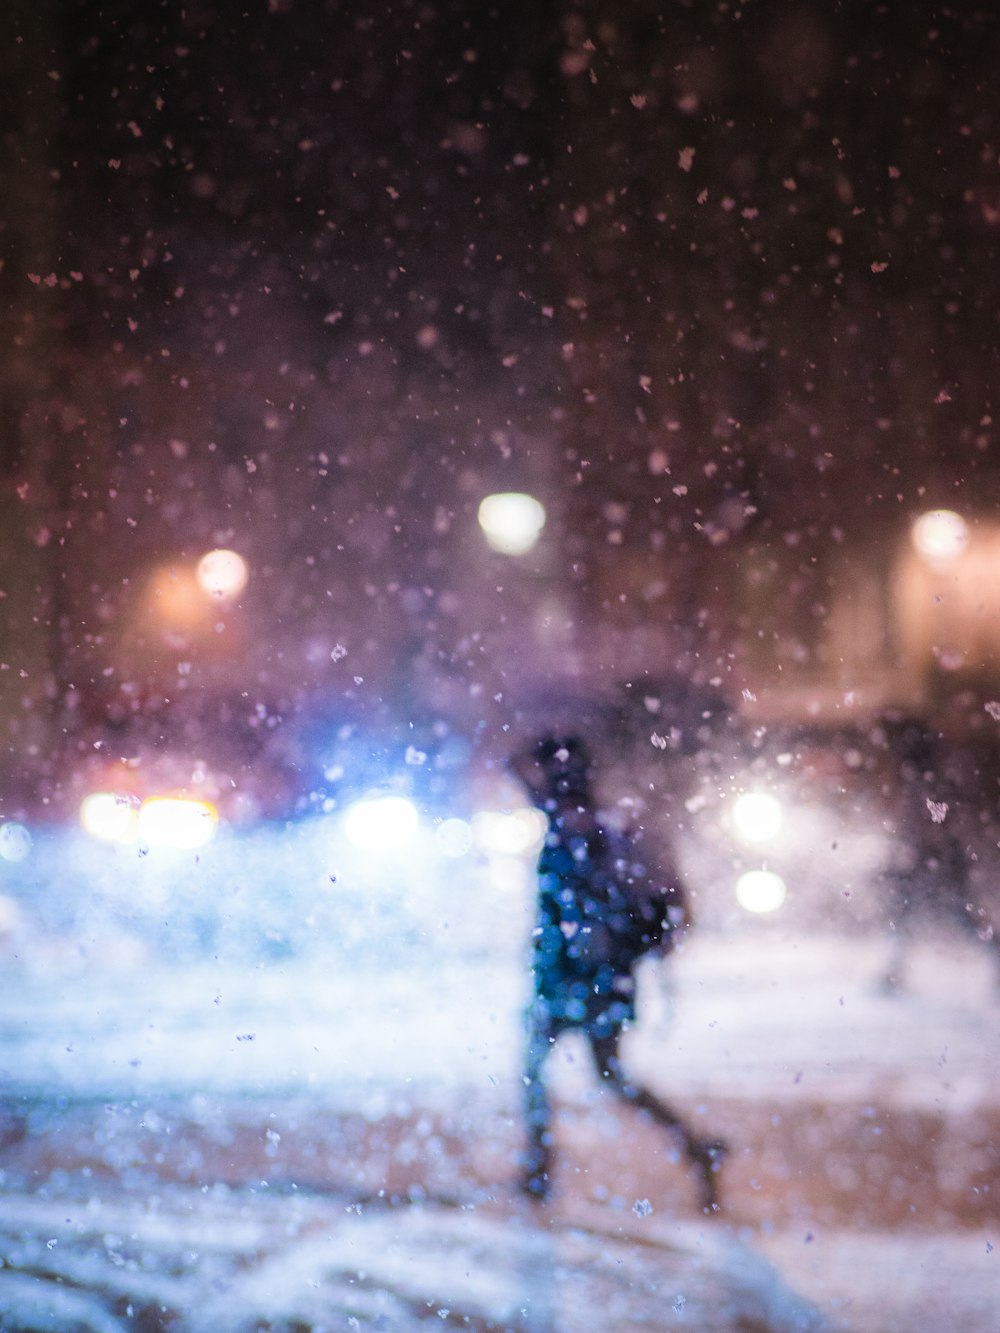 a blurry photo of a person walking in the snow